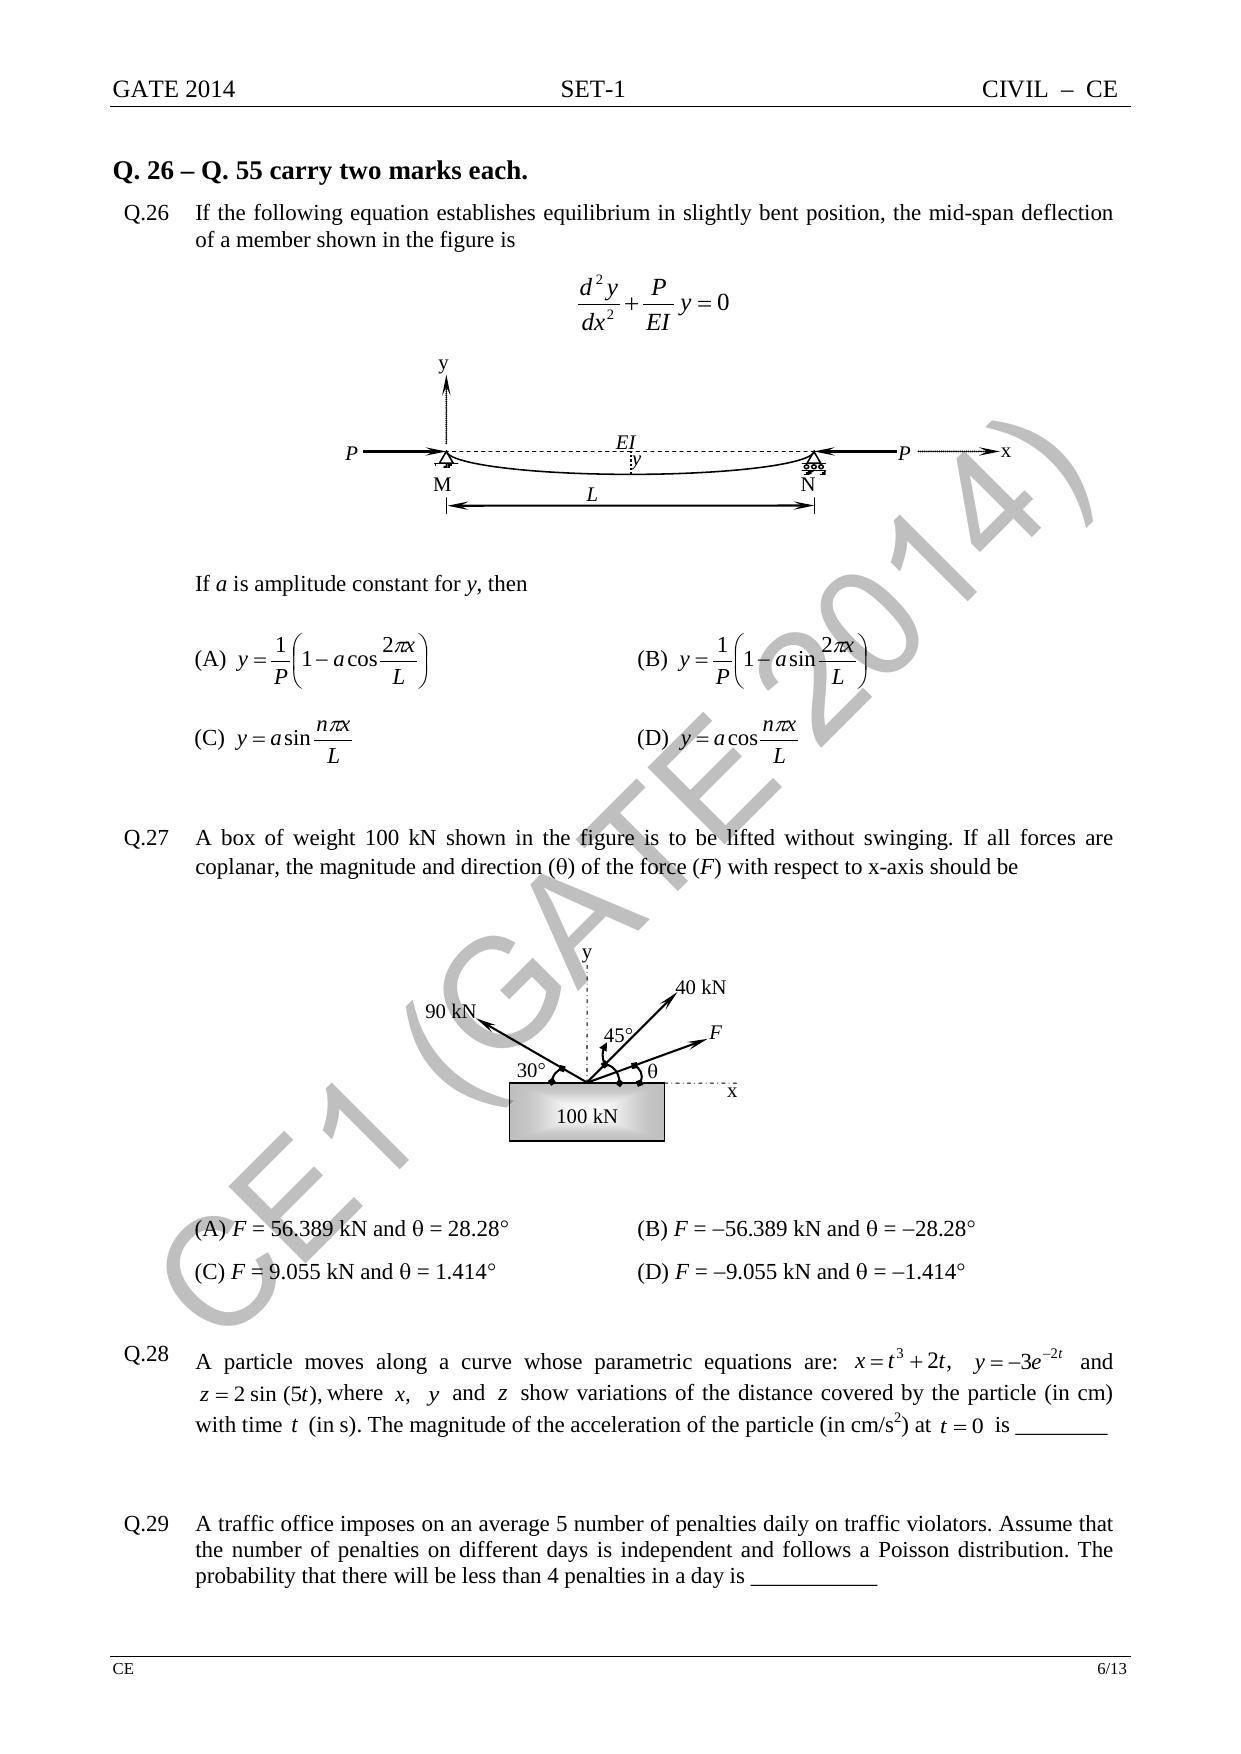 GATE 2014 Civil Engineering (CE) Question Paper with Answer Key - Page 13